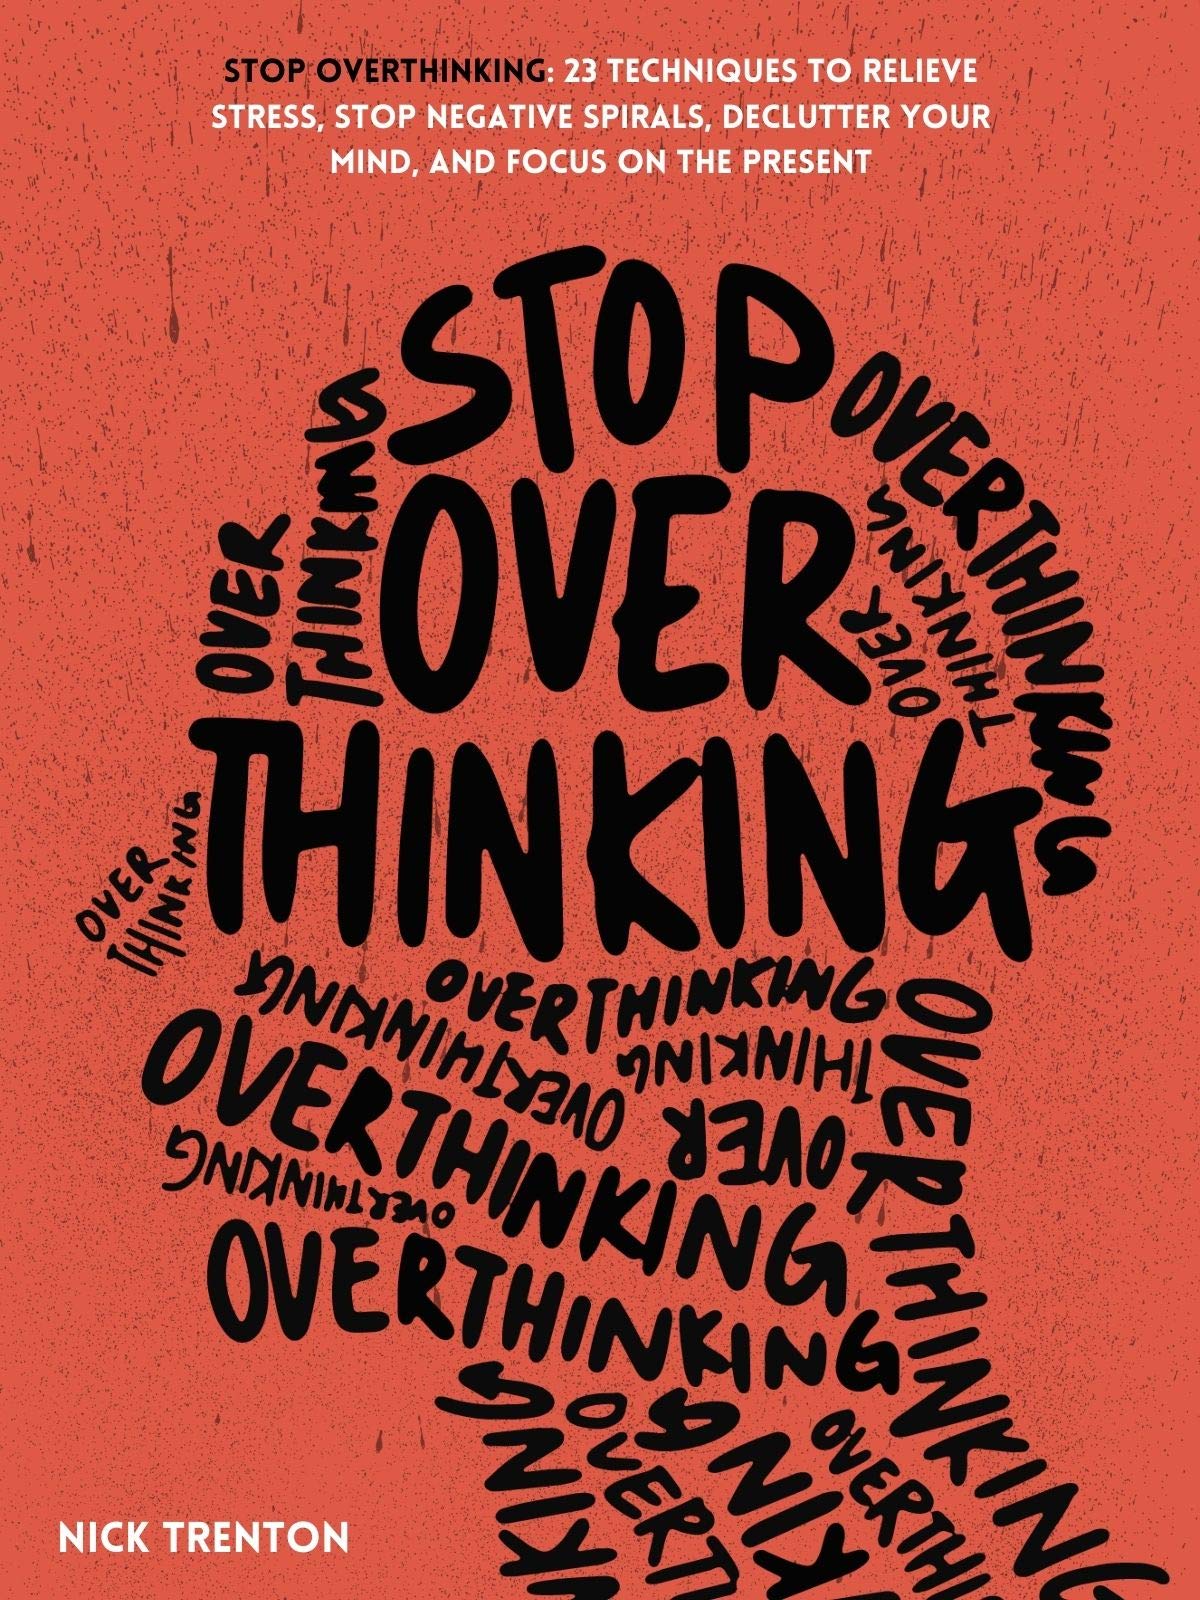 ebook download Stop Overthinking: 23 Techniques to Relieve Stress, Stop Negative Spirals, Declutter Your Mind, and Focus on the Present (The Path to Calm Book 1)